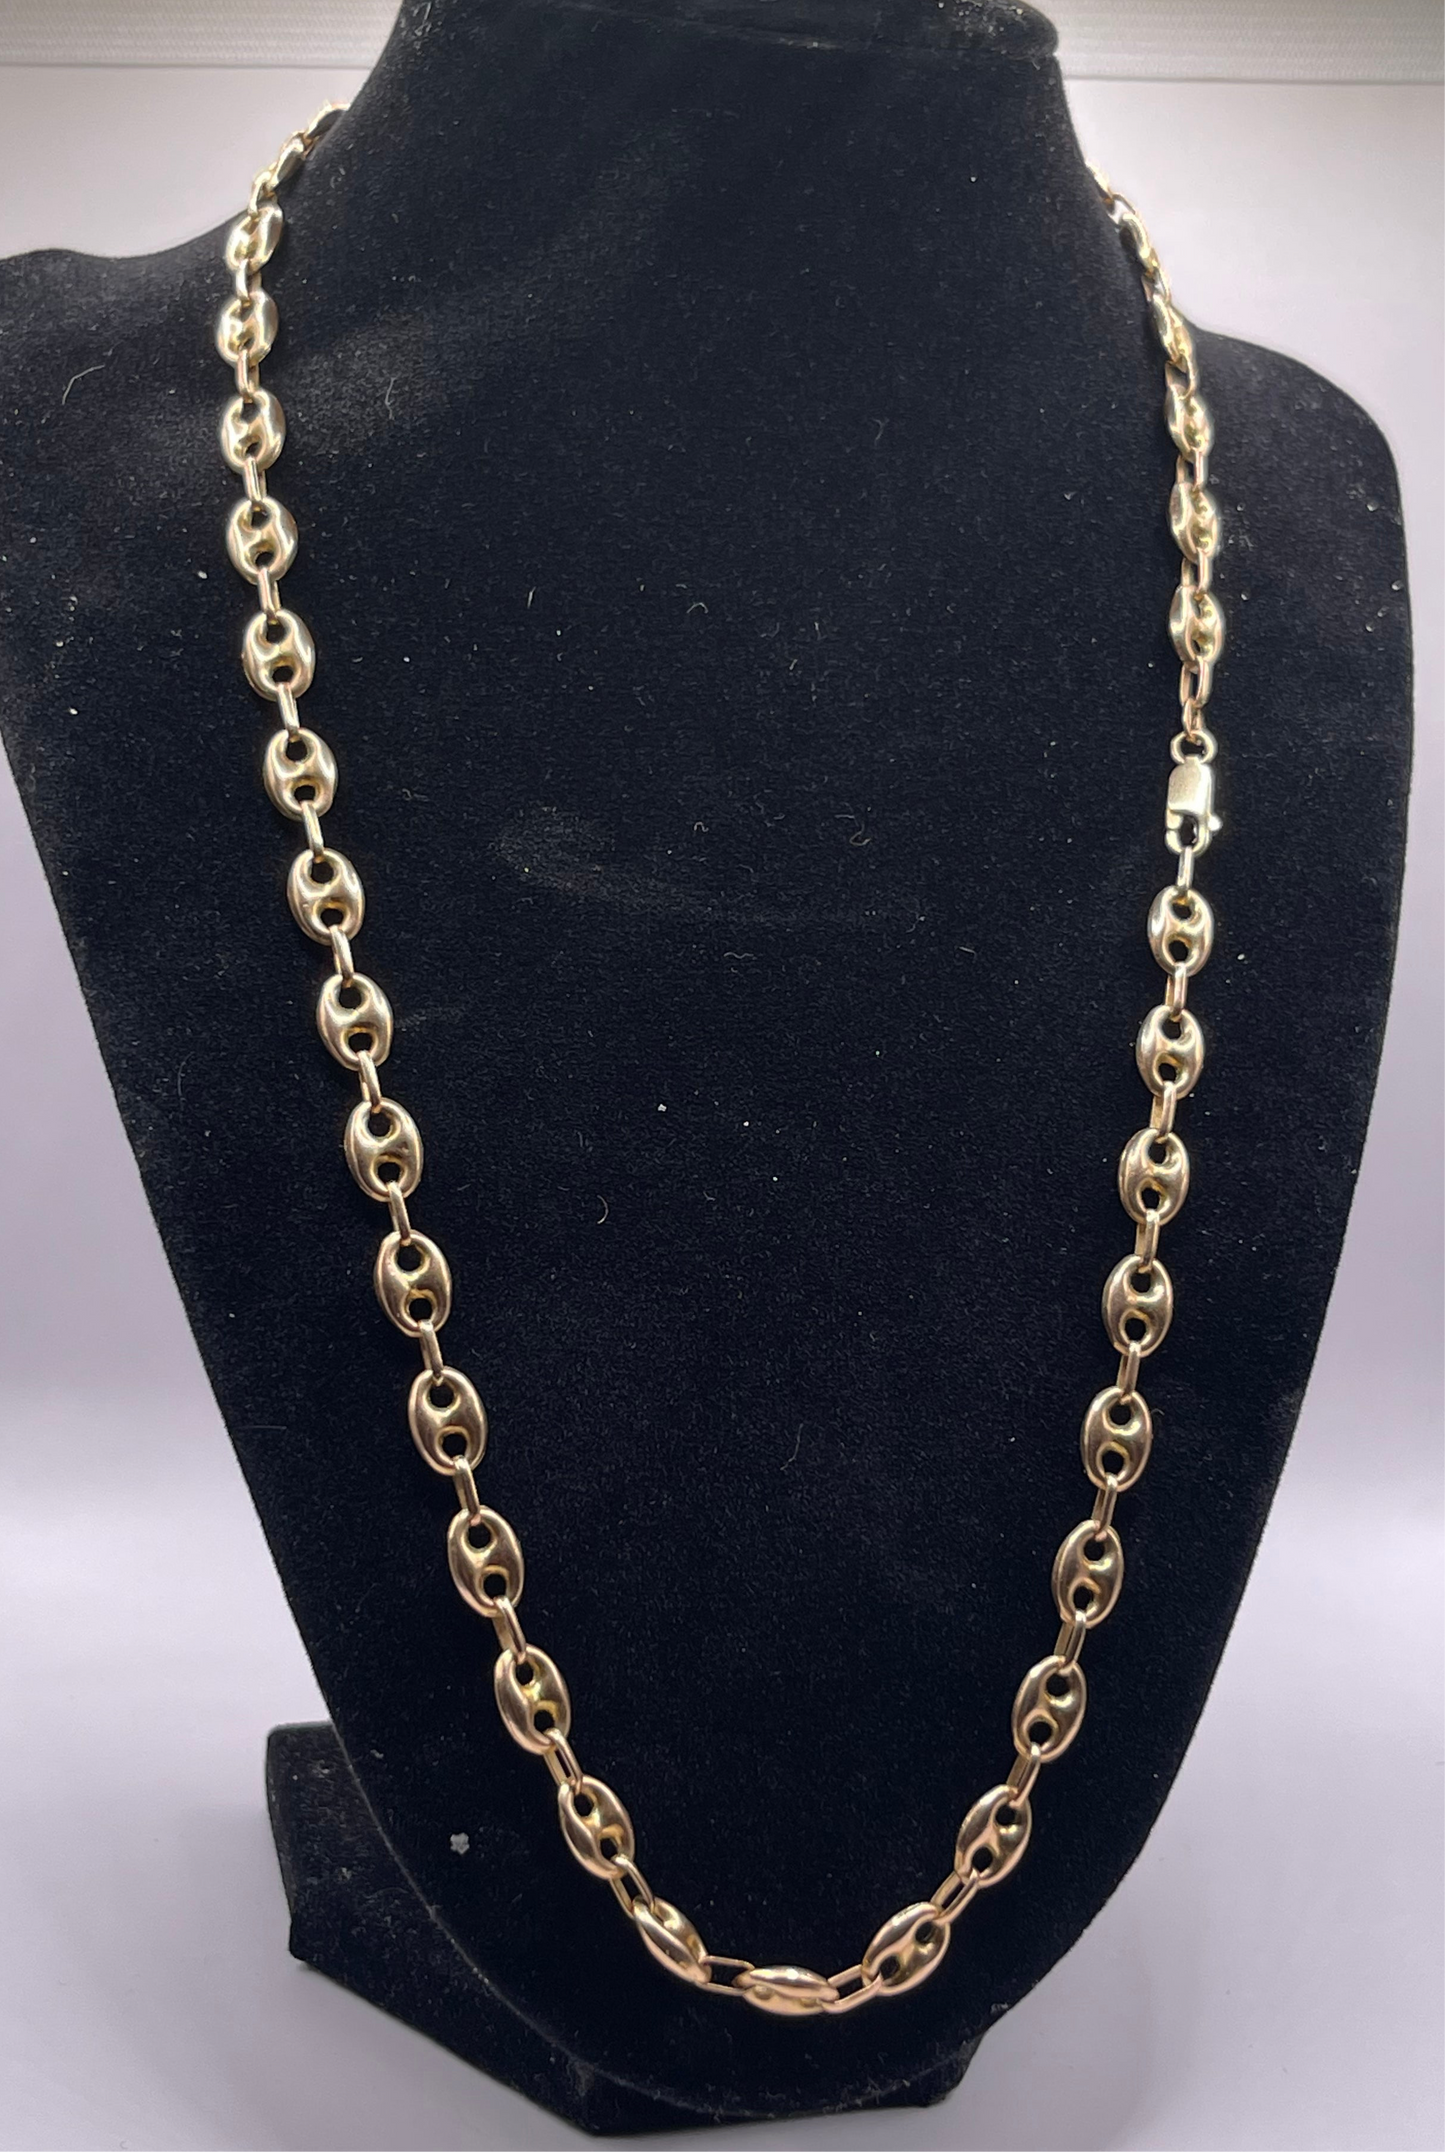 A 14kt gold chain